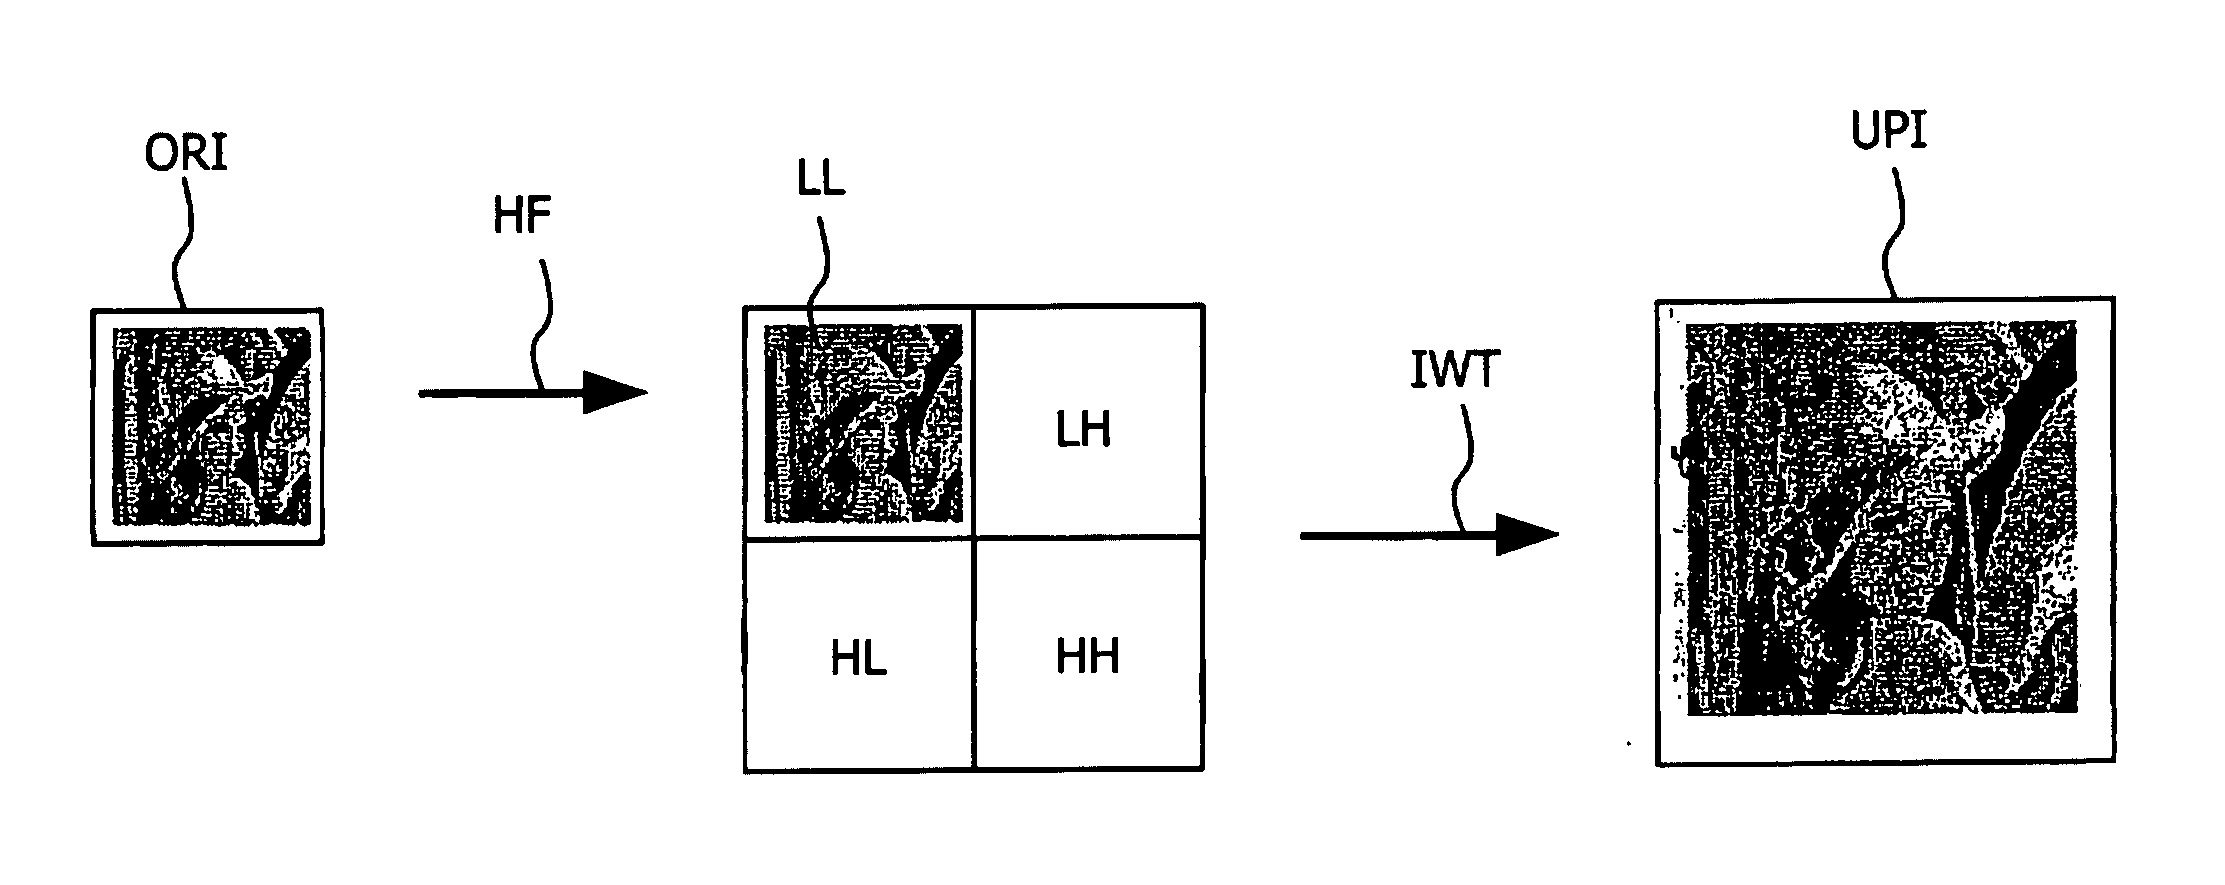 Method for spatial up-scaling of video frames